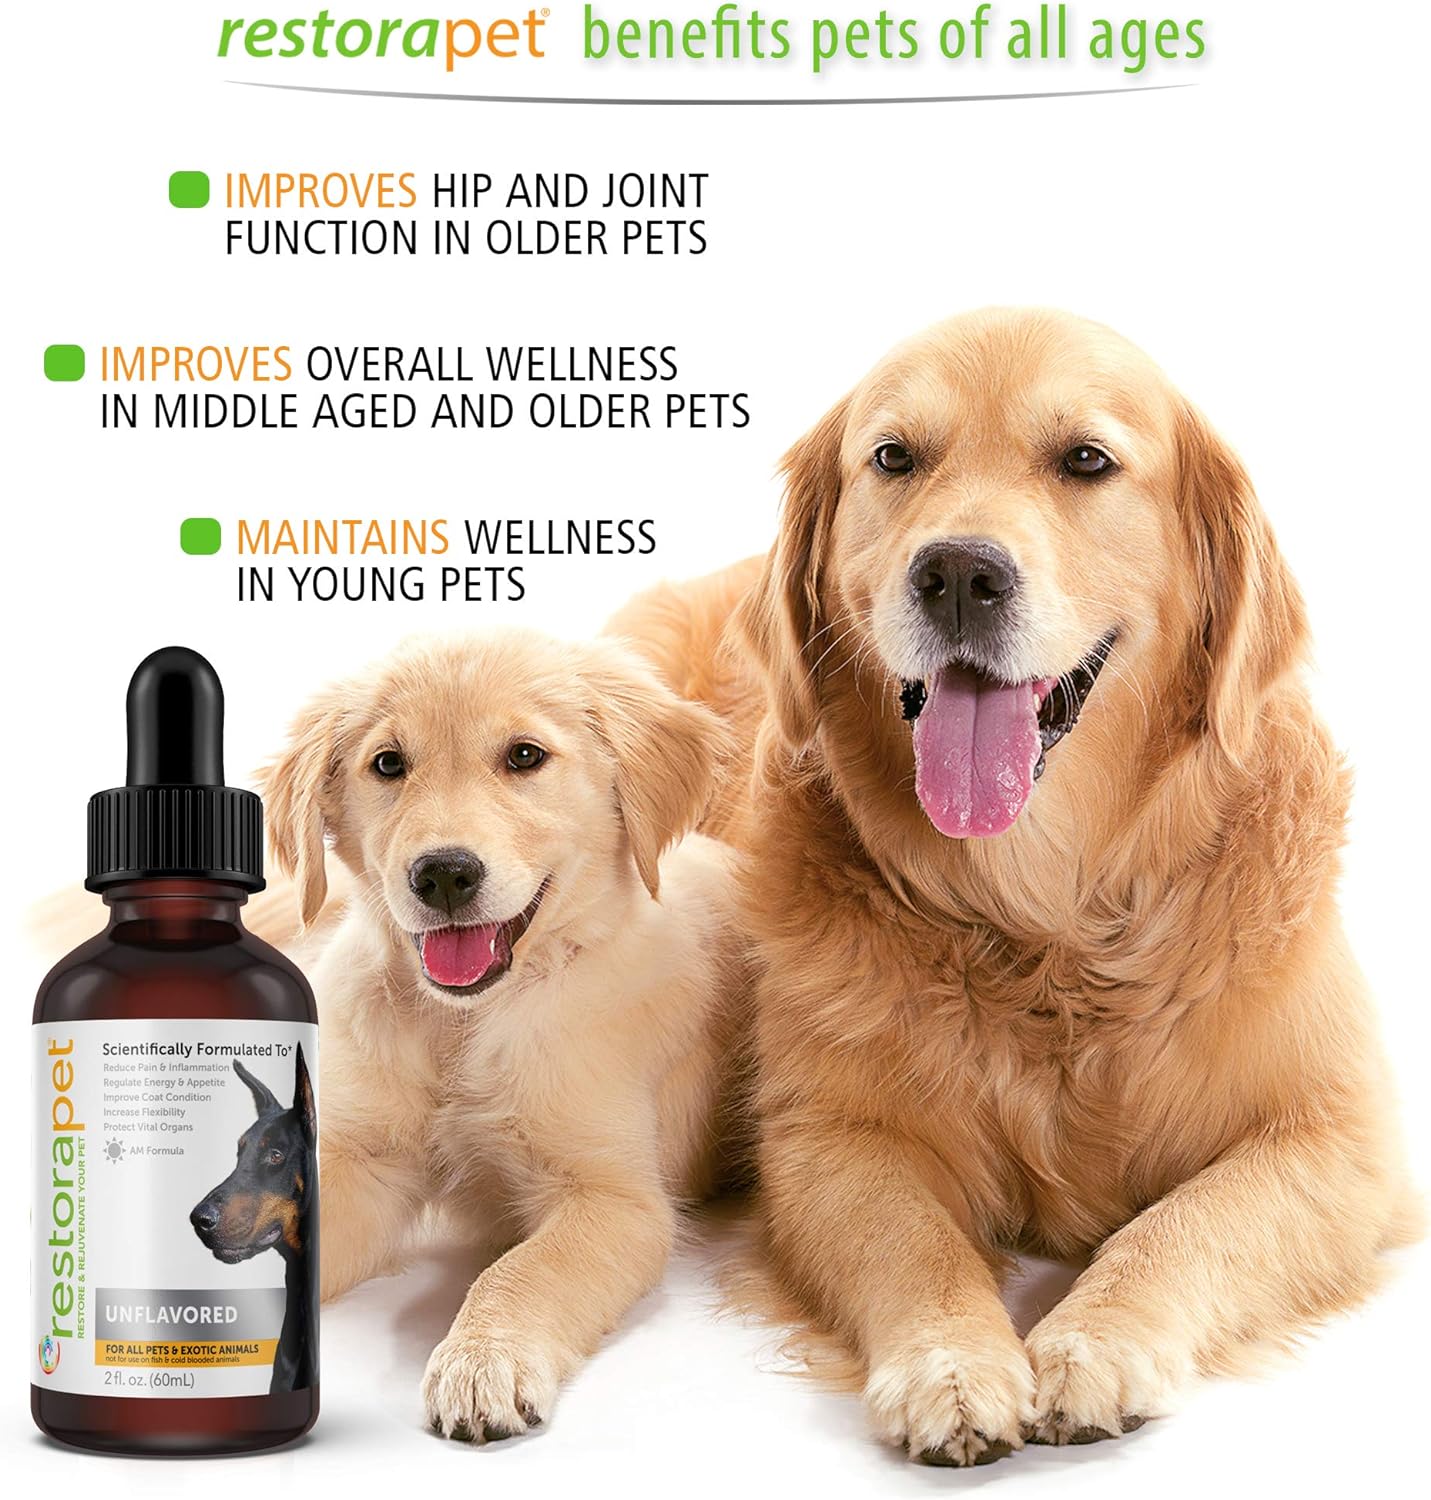 RestoraPet 1-Pack Dog & Cat Beef Liquid Multivitamin | Dog Arthritis Pain Relief | Hip & Joint Vitamins for Dogs - Anti Inflammatory Supplement for Dogs & Cats | Organic & Non-GMO, Vet Approved : Pet Supplies